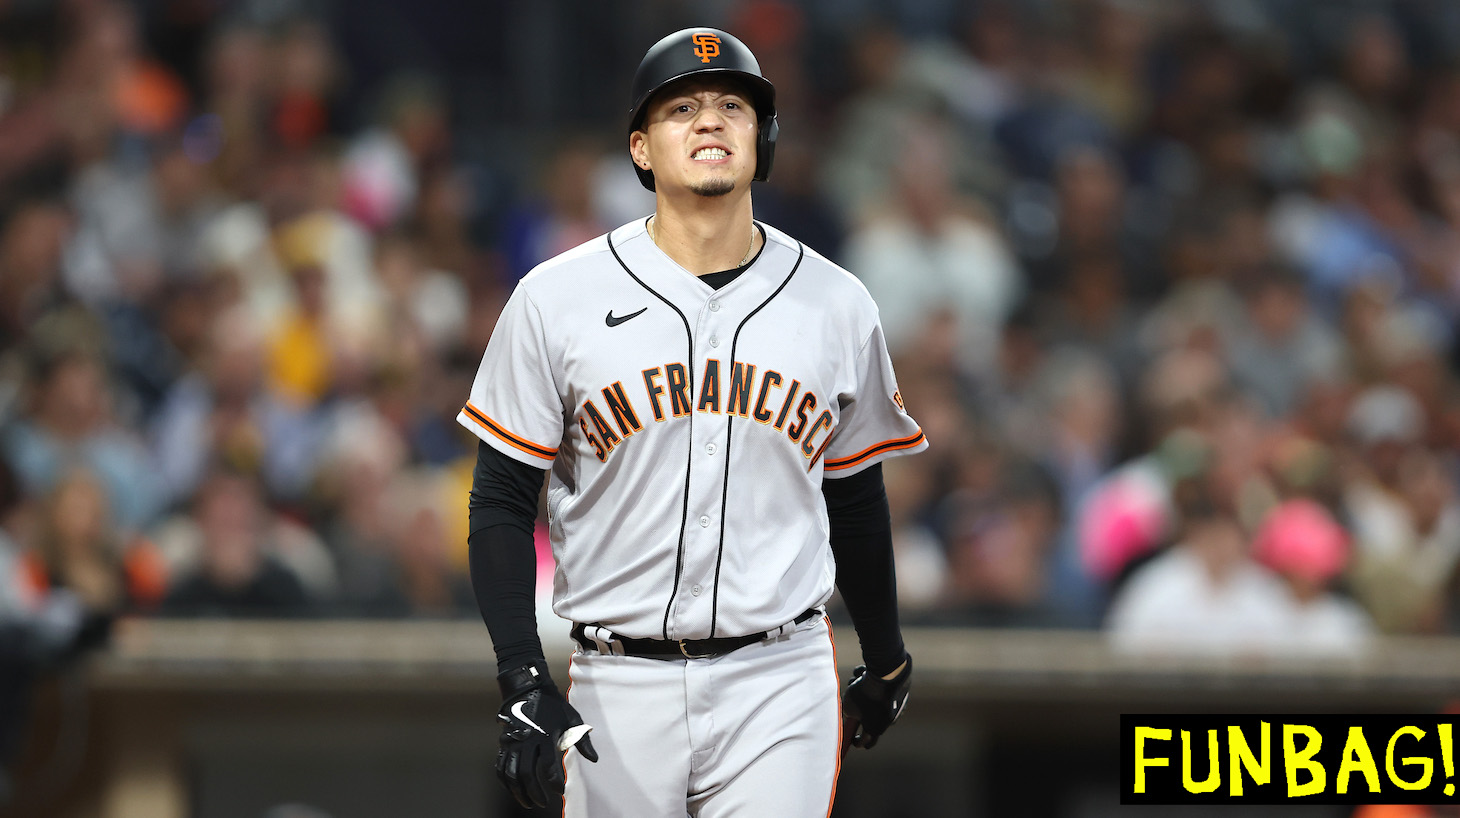 SAN DIEGO, CALIFORNIA - JULY 08: Wilmer Flores #41 of the San Francisco Giants reacts to fouling a ball off his foot during the fouth inning of a game against the San Diego Padres at PETCO Park on July 08, 2022 in San Diego, California. (Photo by Sean M. Haffey/Getty Images)